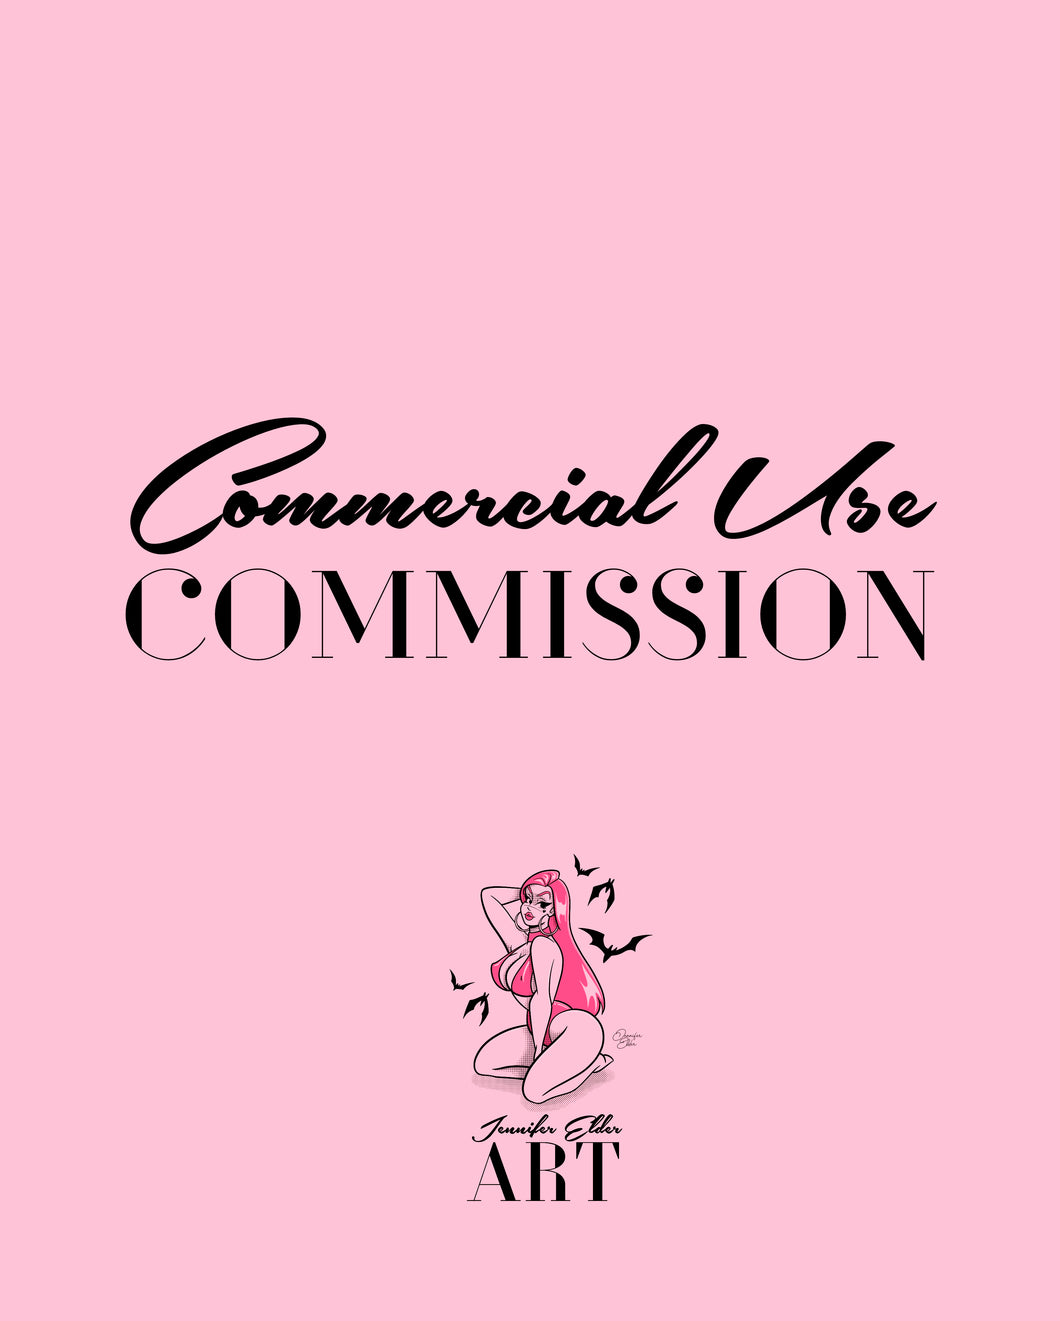 Commercial Use Commission